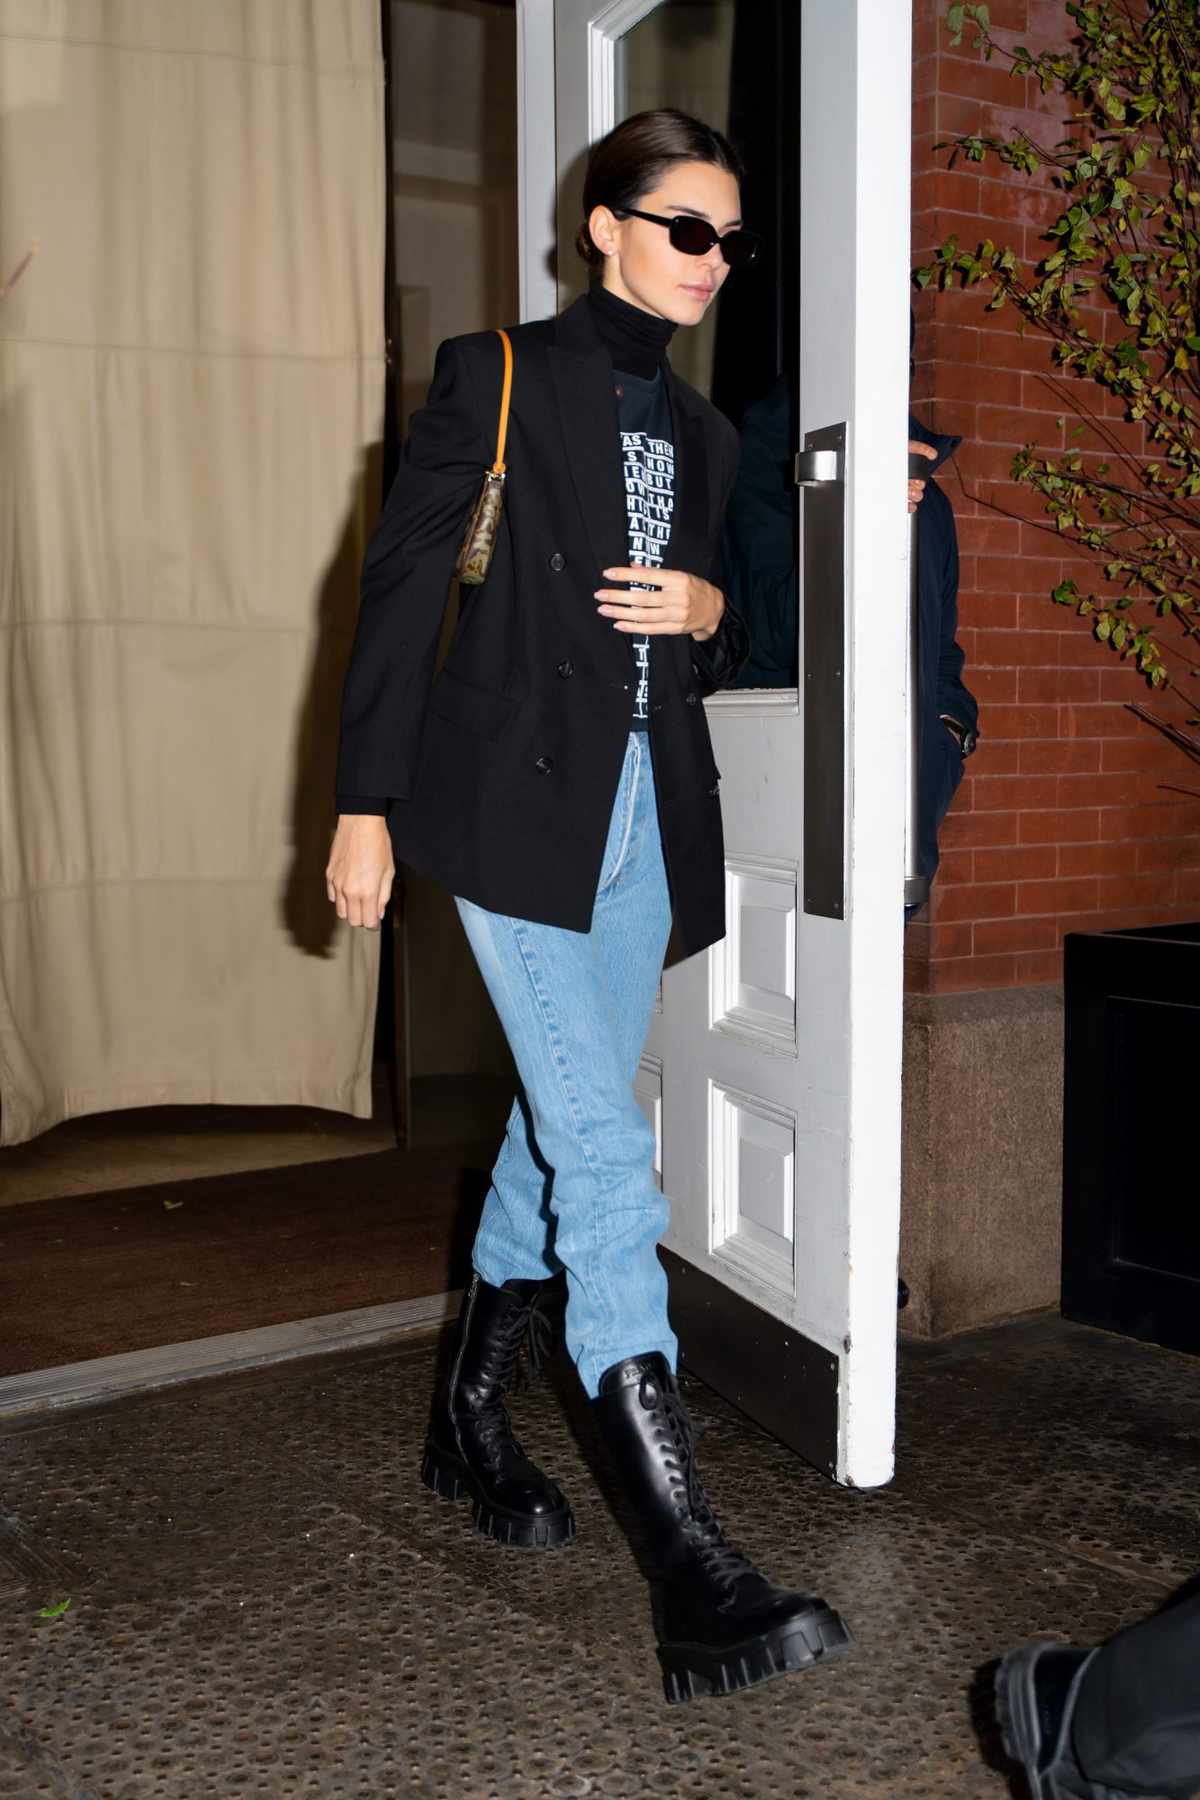 <p>Channeling major 90s Princess Diana vibes, Kendall was seen out in NYC sporting a structured black blazer over a similar-hued graphic tee and turtleneck. Her mom jeans loosely tucked into a pair of chunky combat boots, Jenner’s outfit rendered new-age business casual attire.</p>
                            